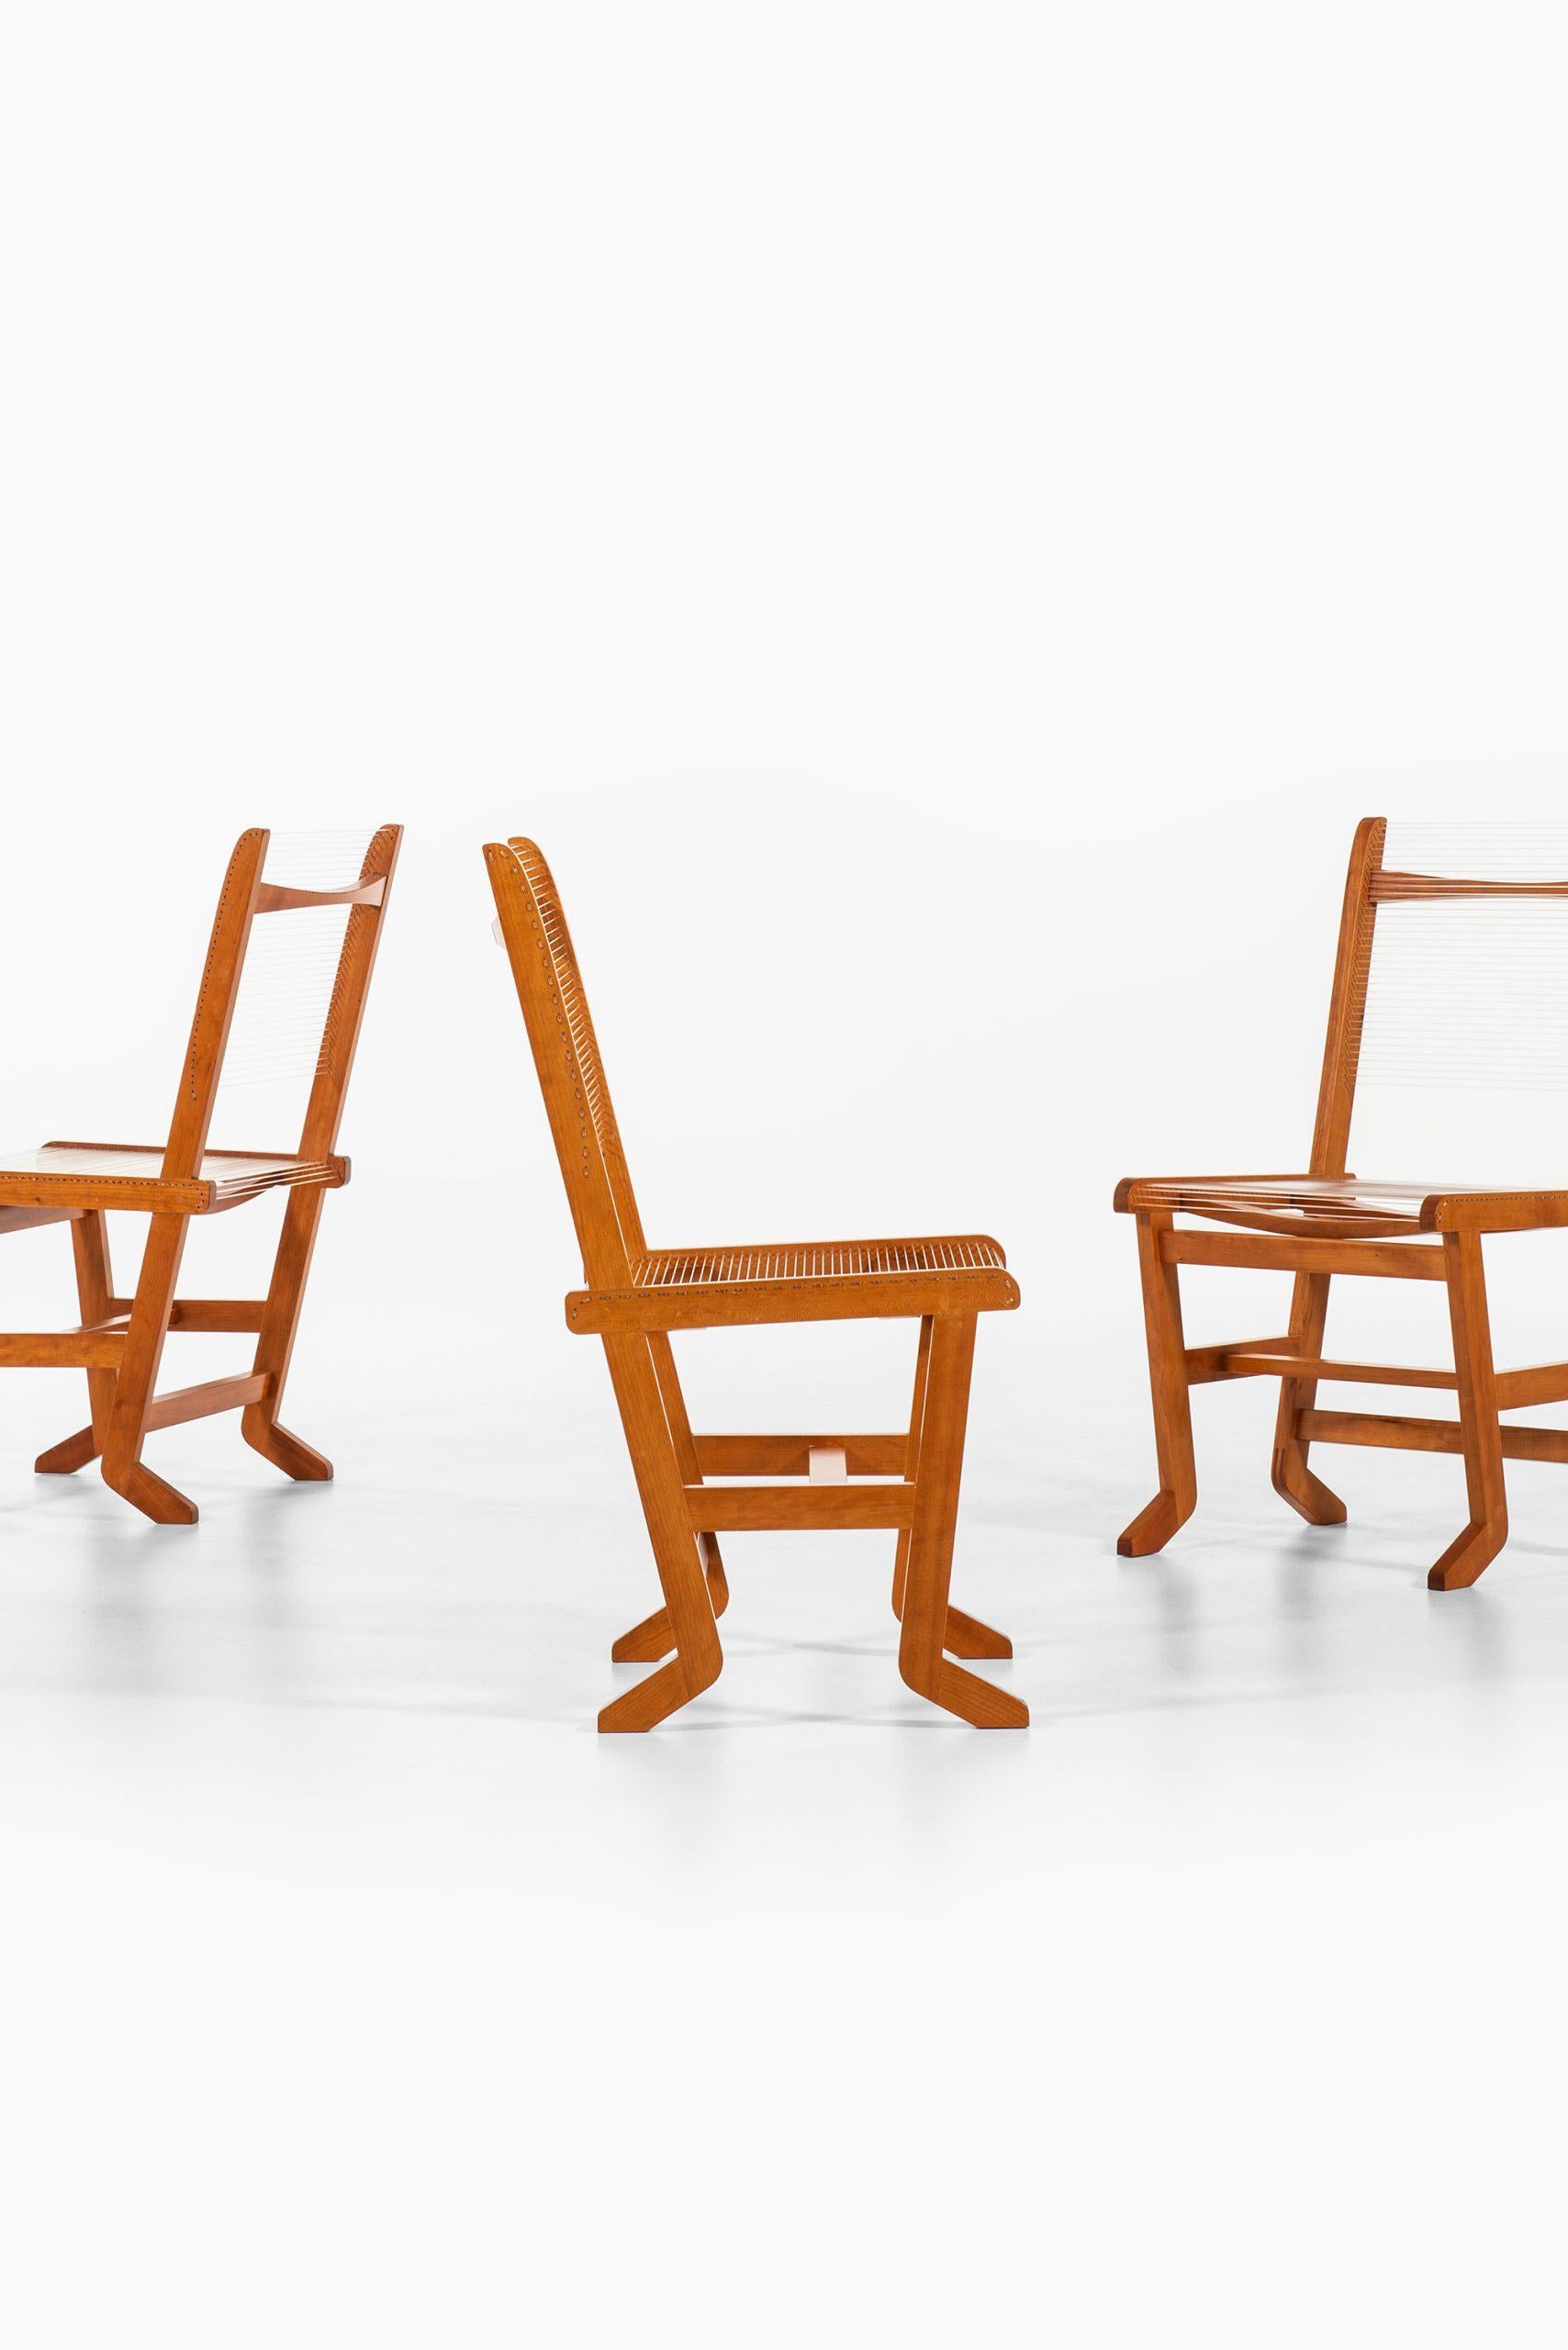 Unique chairs attributed to Helge Vestergaard-Jensen. Produced by cabinetmaker Thysen Nielsen in Denmark.